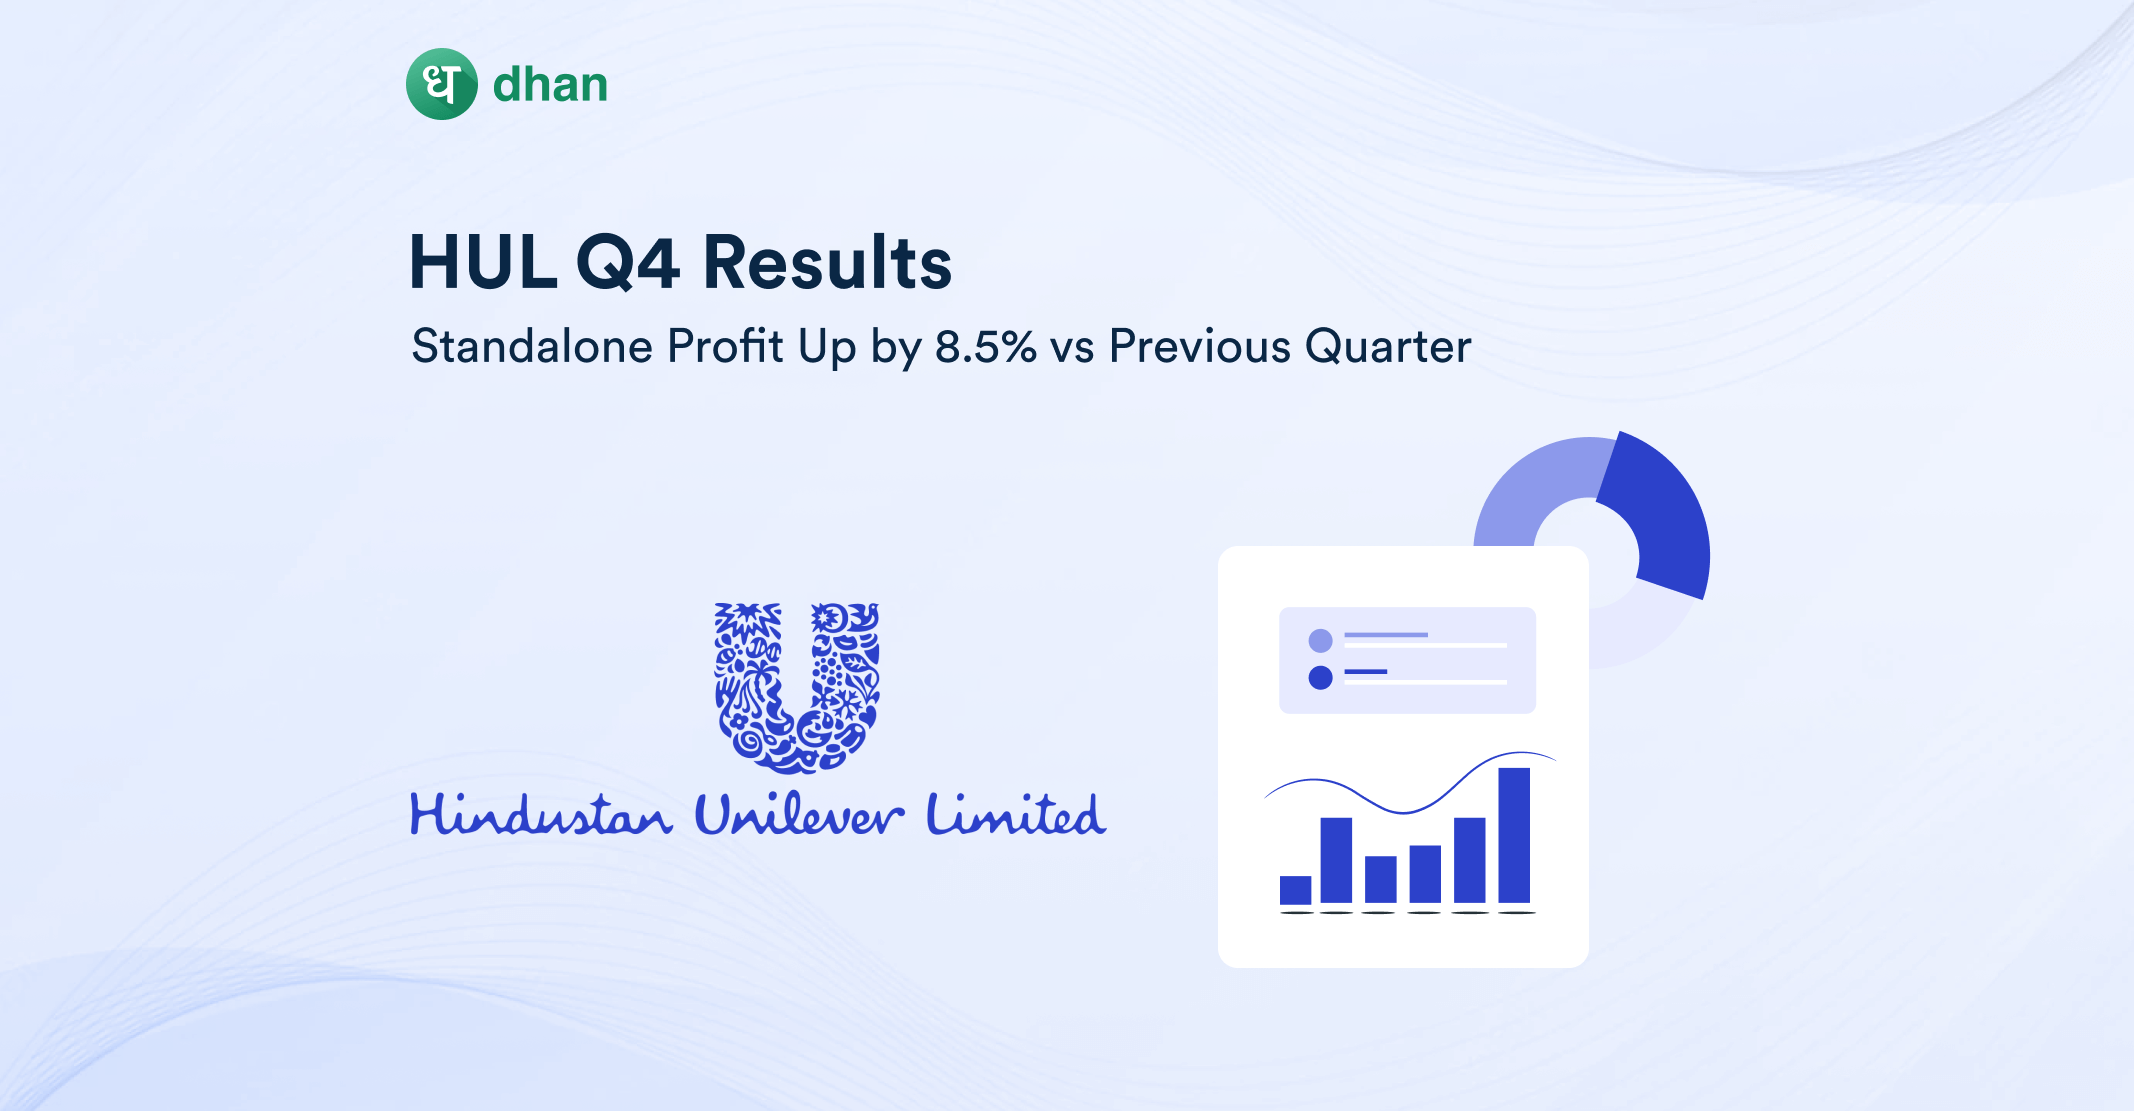 HUL Q4 Results 2022 - Standalone Profit Up by 8.5% vs Previous Quarter